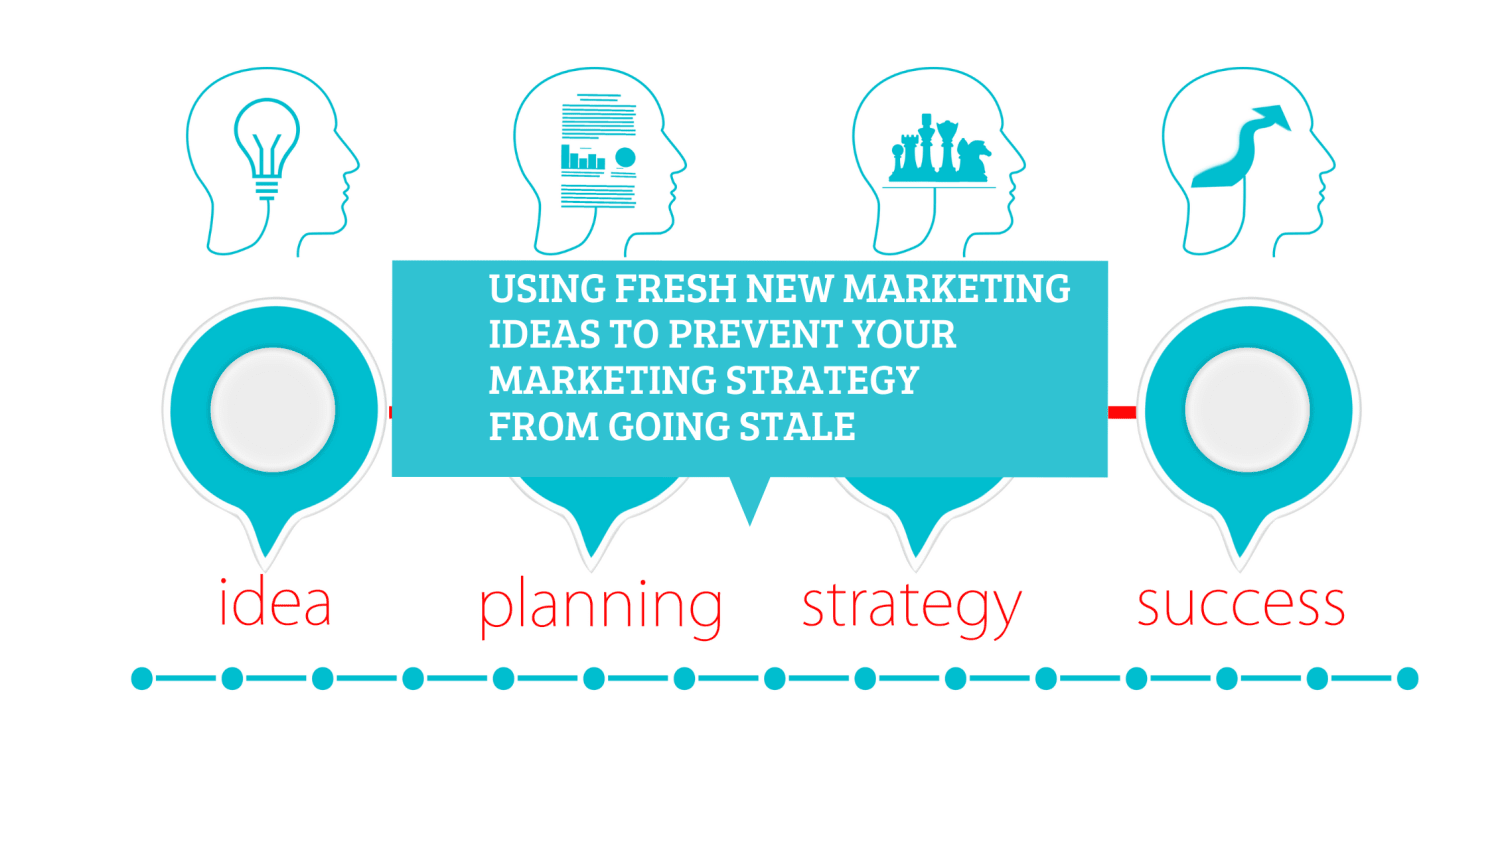 Using Fresh New Marketing Ideas to Prevent Your Marketing Strategy from Going Stale